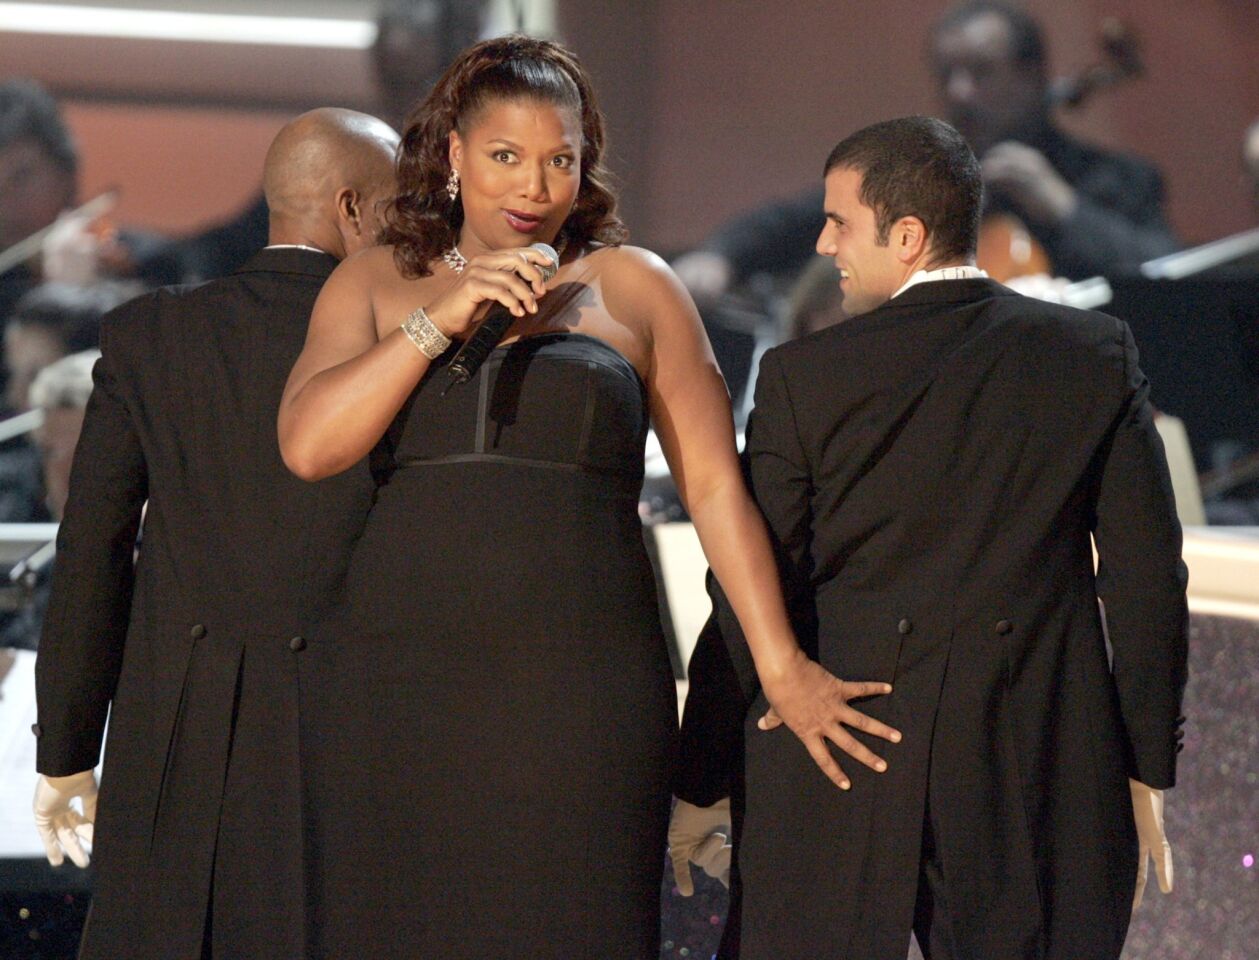 Latifah performed "Lush Life" and "Baby Get Lost" off her 2004 pop and jazz record, "The Dana Owens Album," at the 47th Grammy Awards.